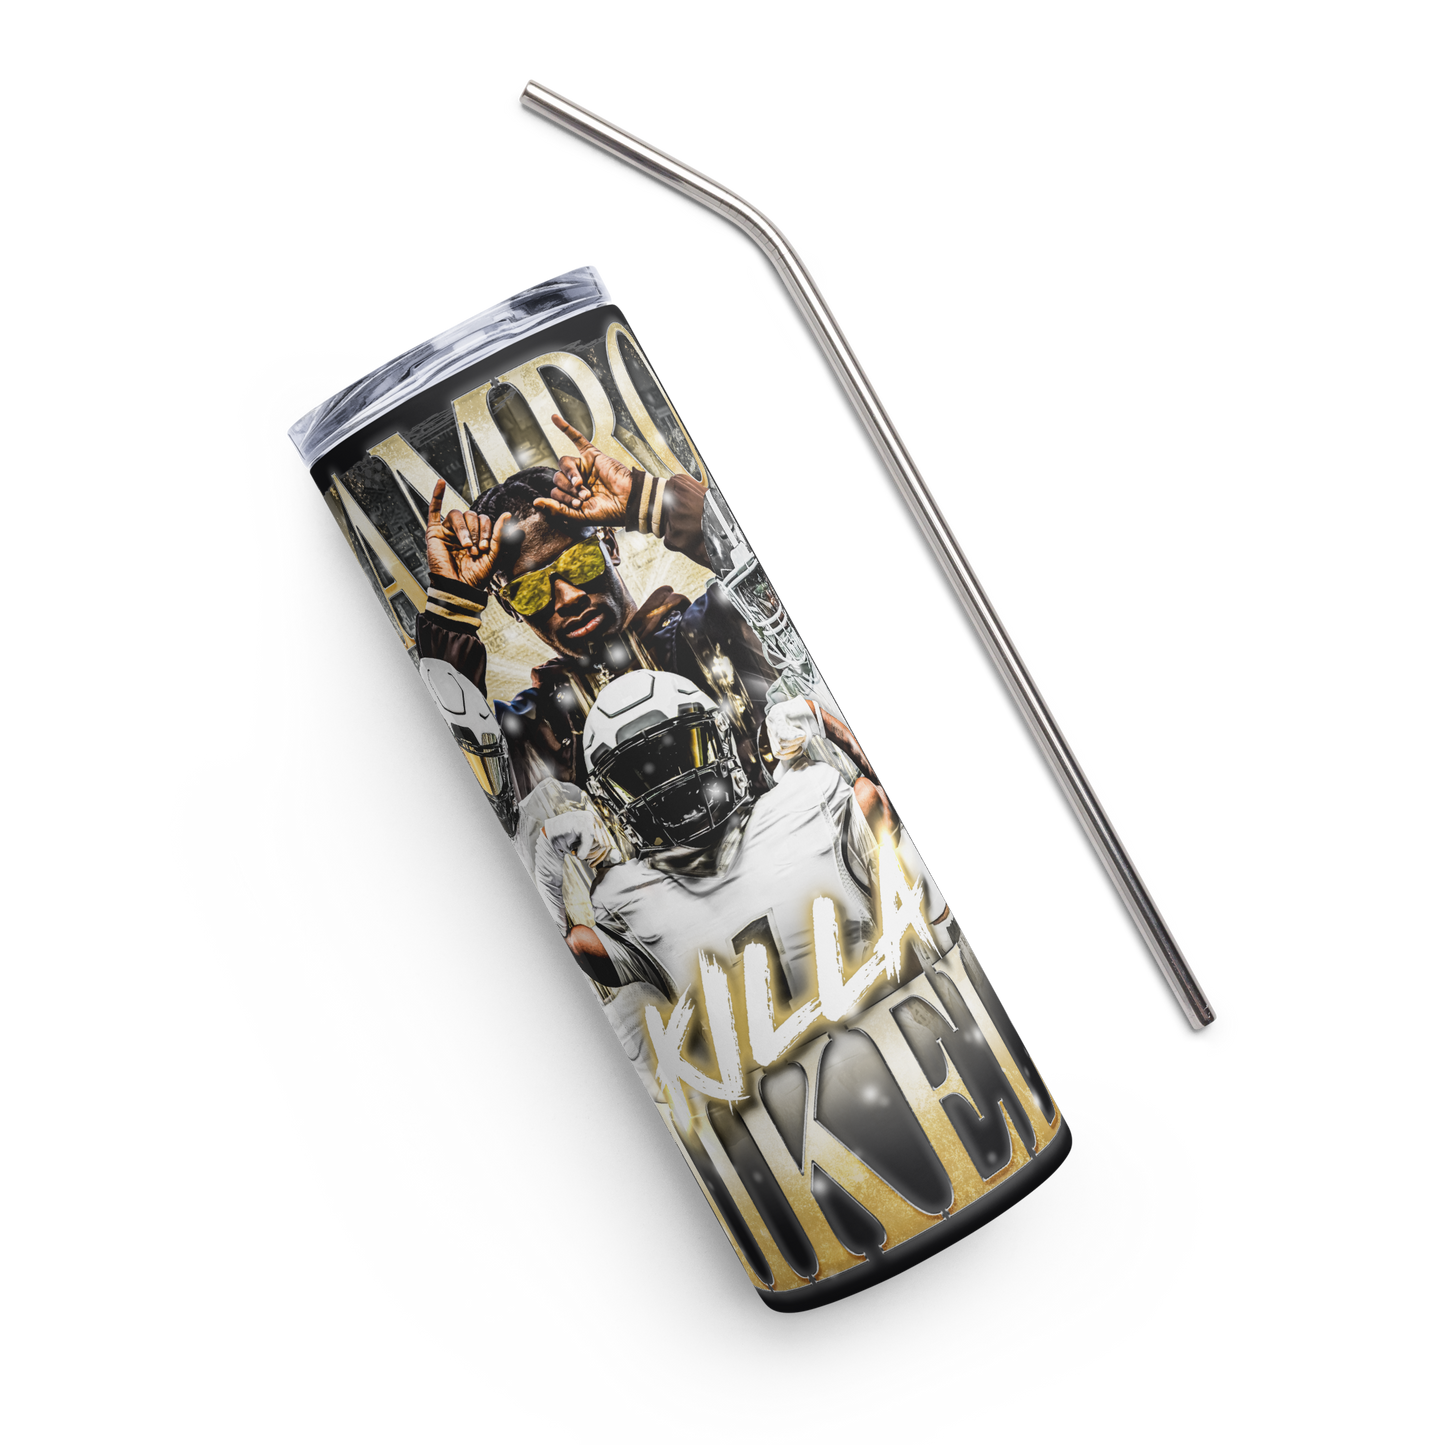 MIKELL STAINLESS STEEL TUMBLER